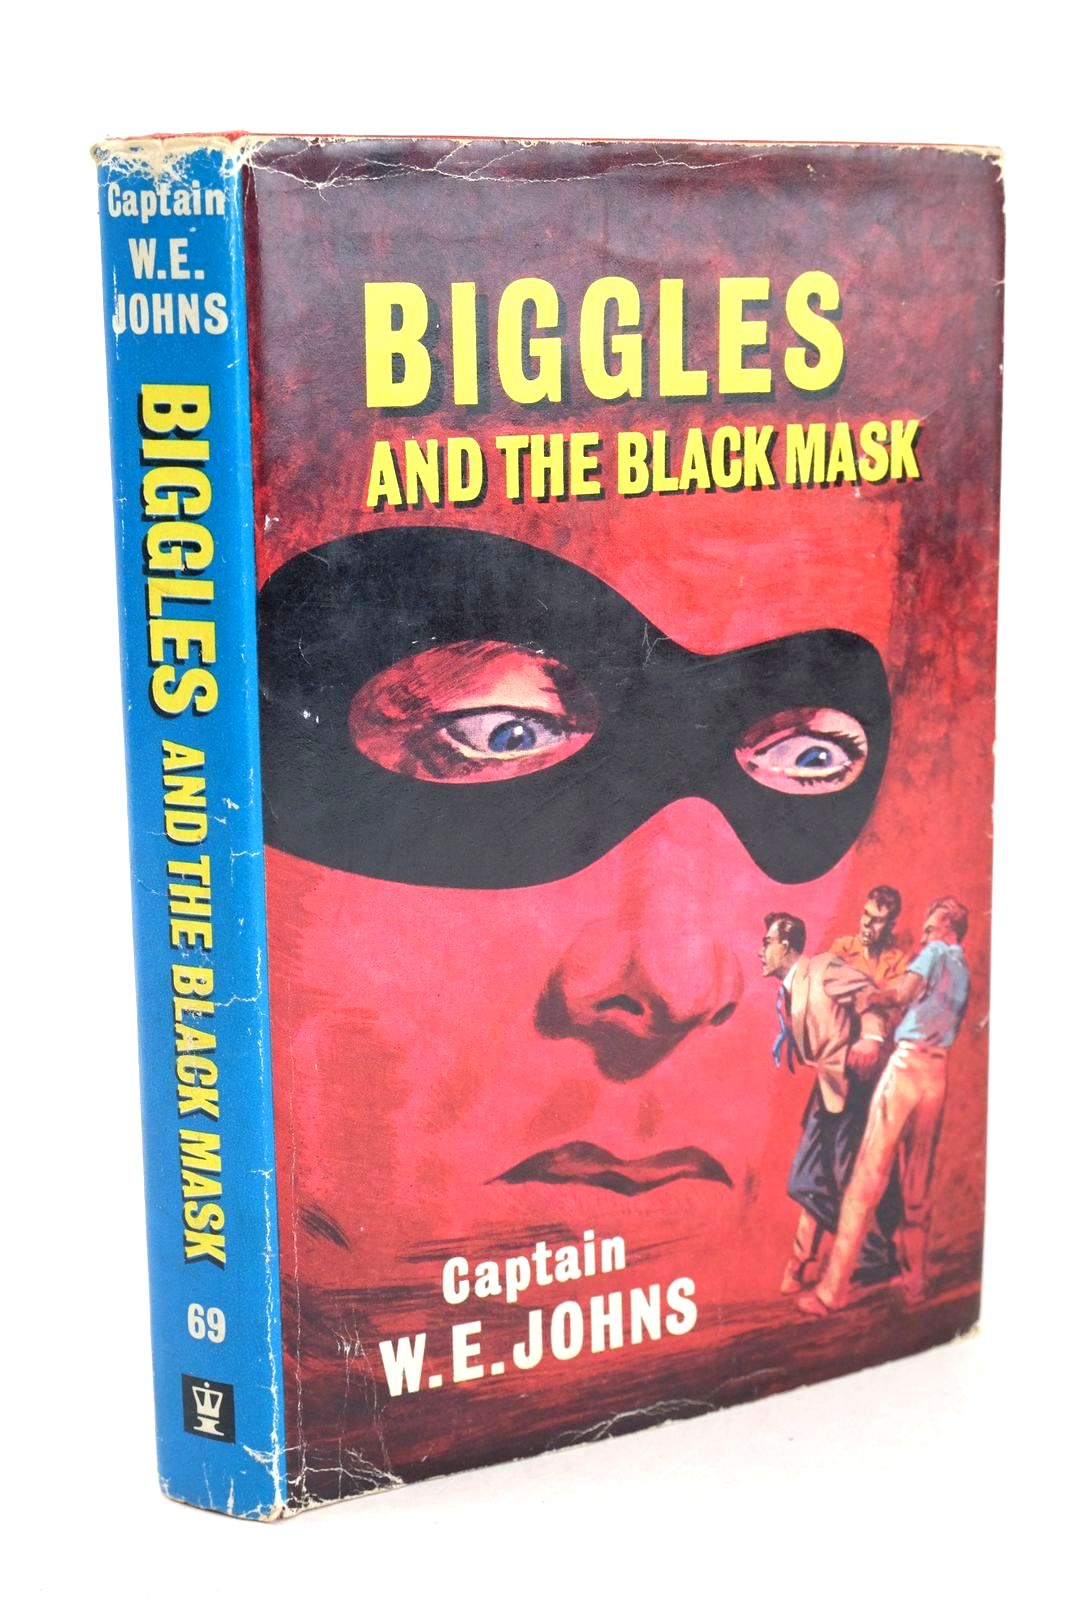 Photo of BIGGLES AND THE BLACK MASK written by Johns, W.E. illustrated by Stead,  published by Hodder & Stoughton (STOCK CODE: 1326033)  for sale by Stella & Rose's Books